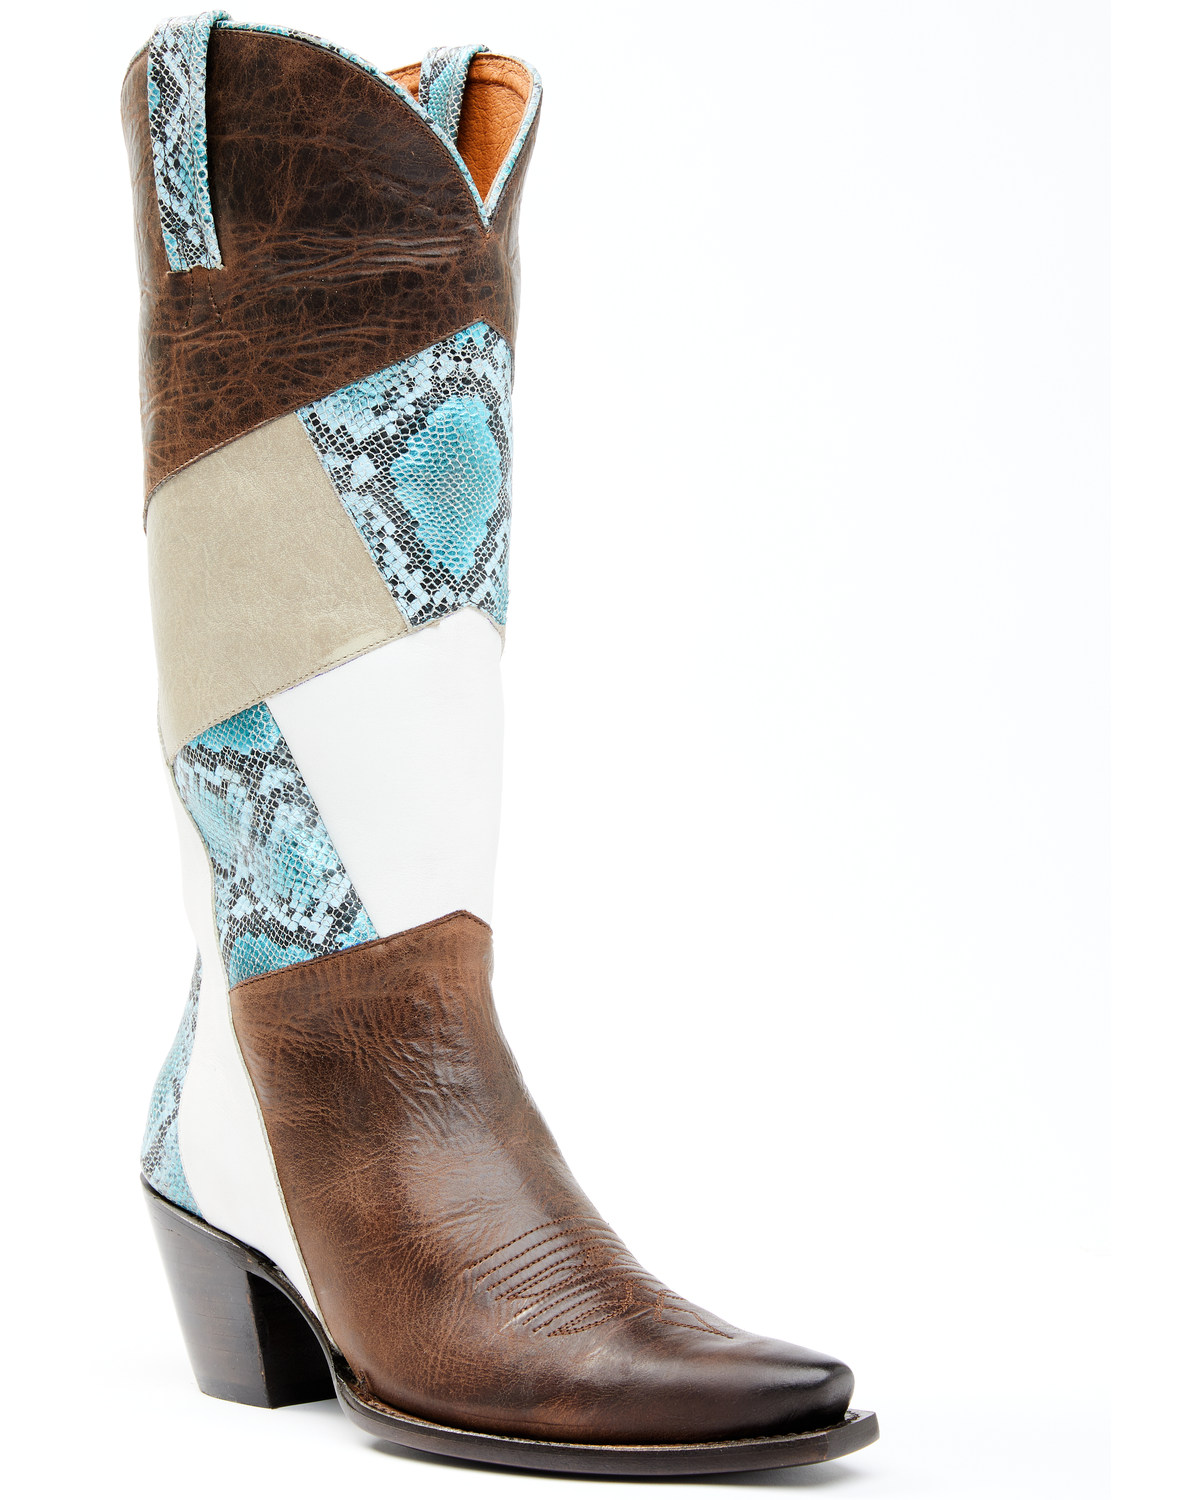 Idyllwind Women's Seams-To-Be Western Boots - Snip Toe